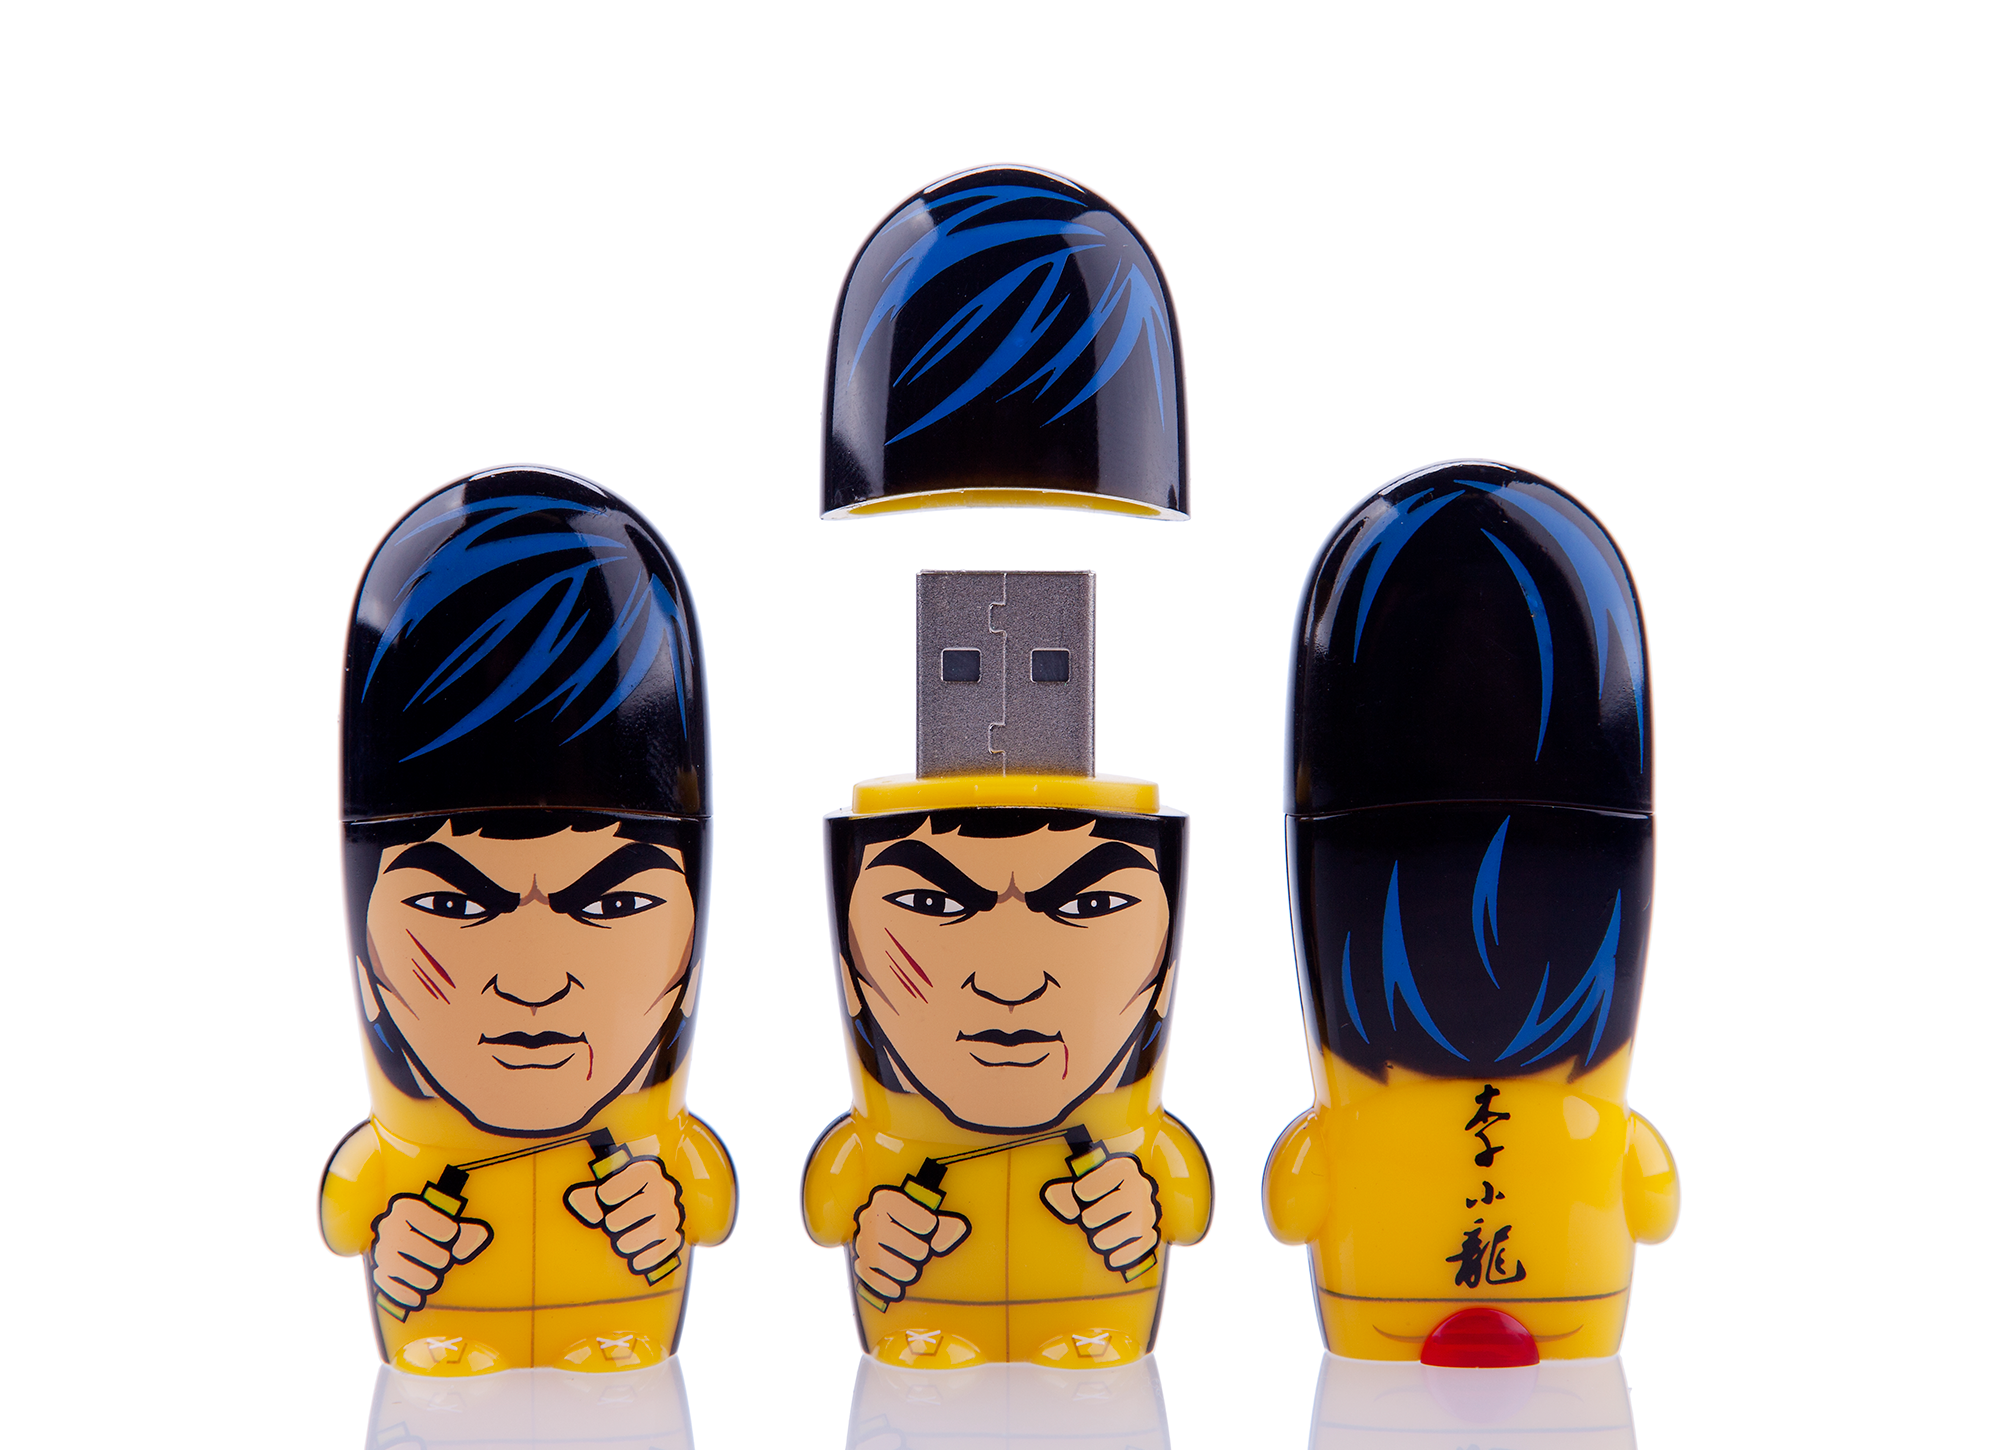 Bruce Lee MIMOBOT USB flash drive for Mimoco